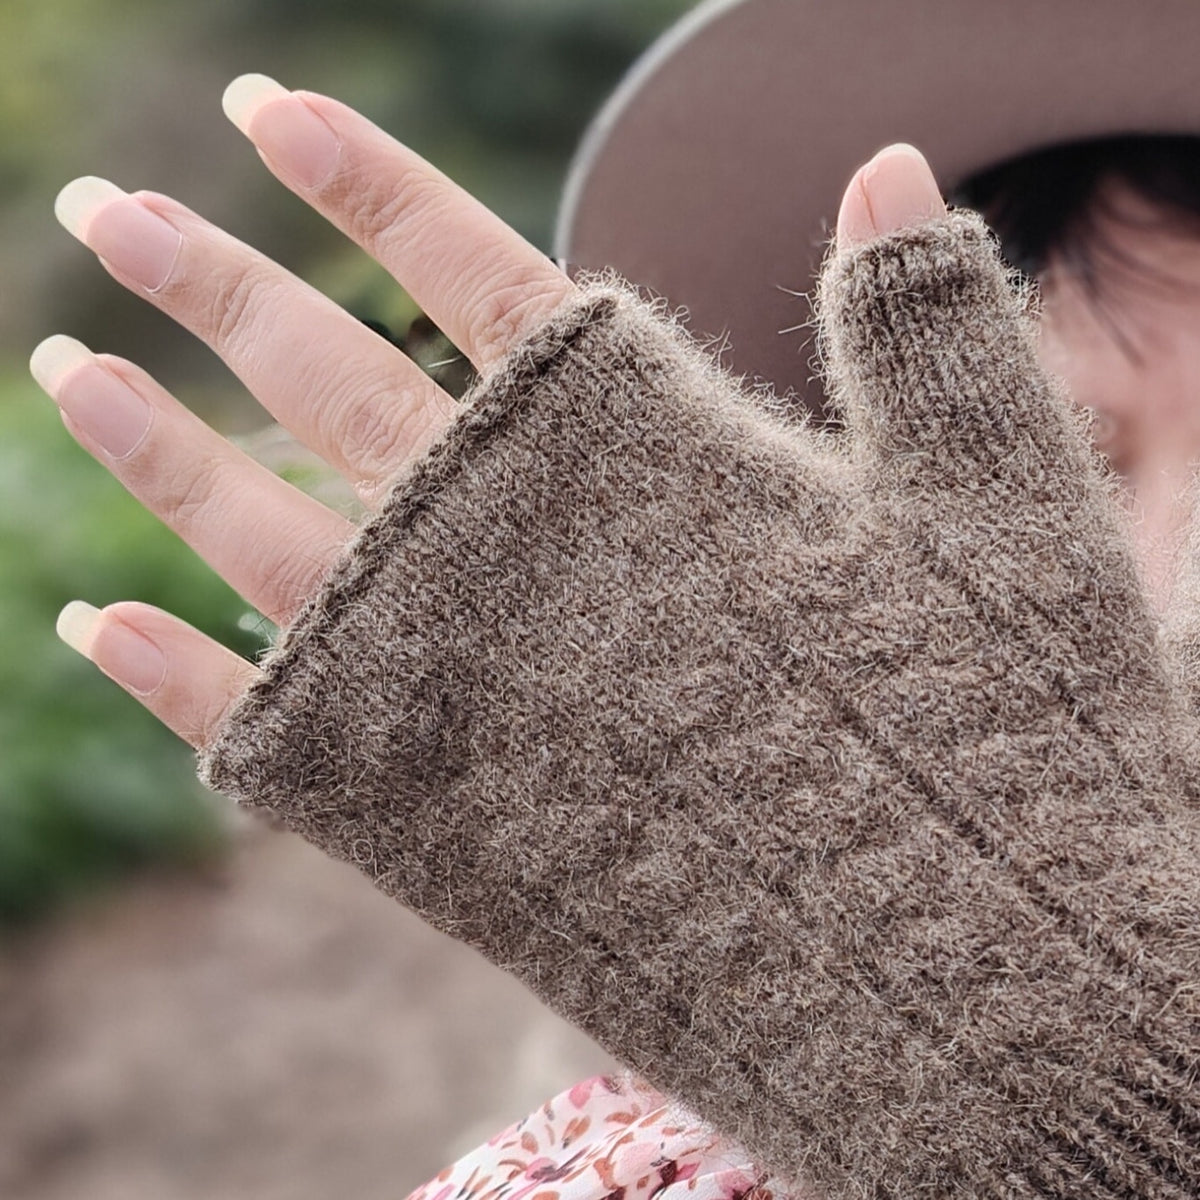 NZ Made Wyld Fingerless Wool Mittens: Fashion and Functionality